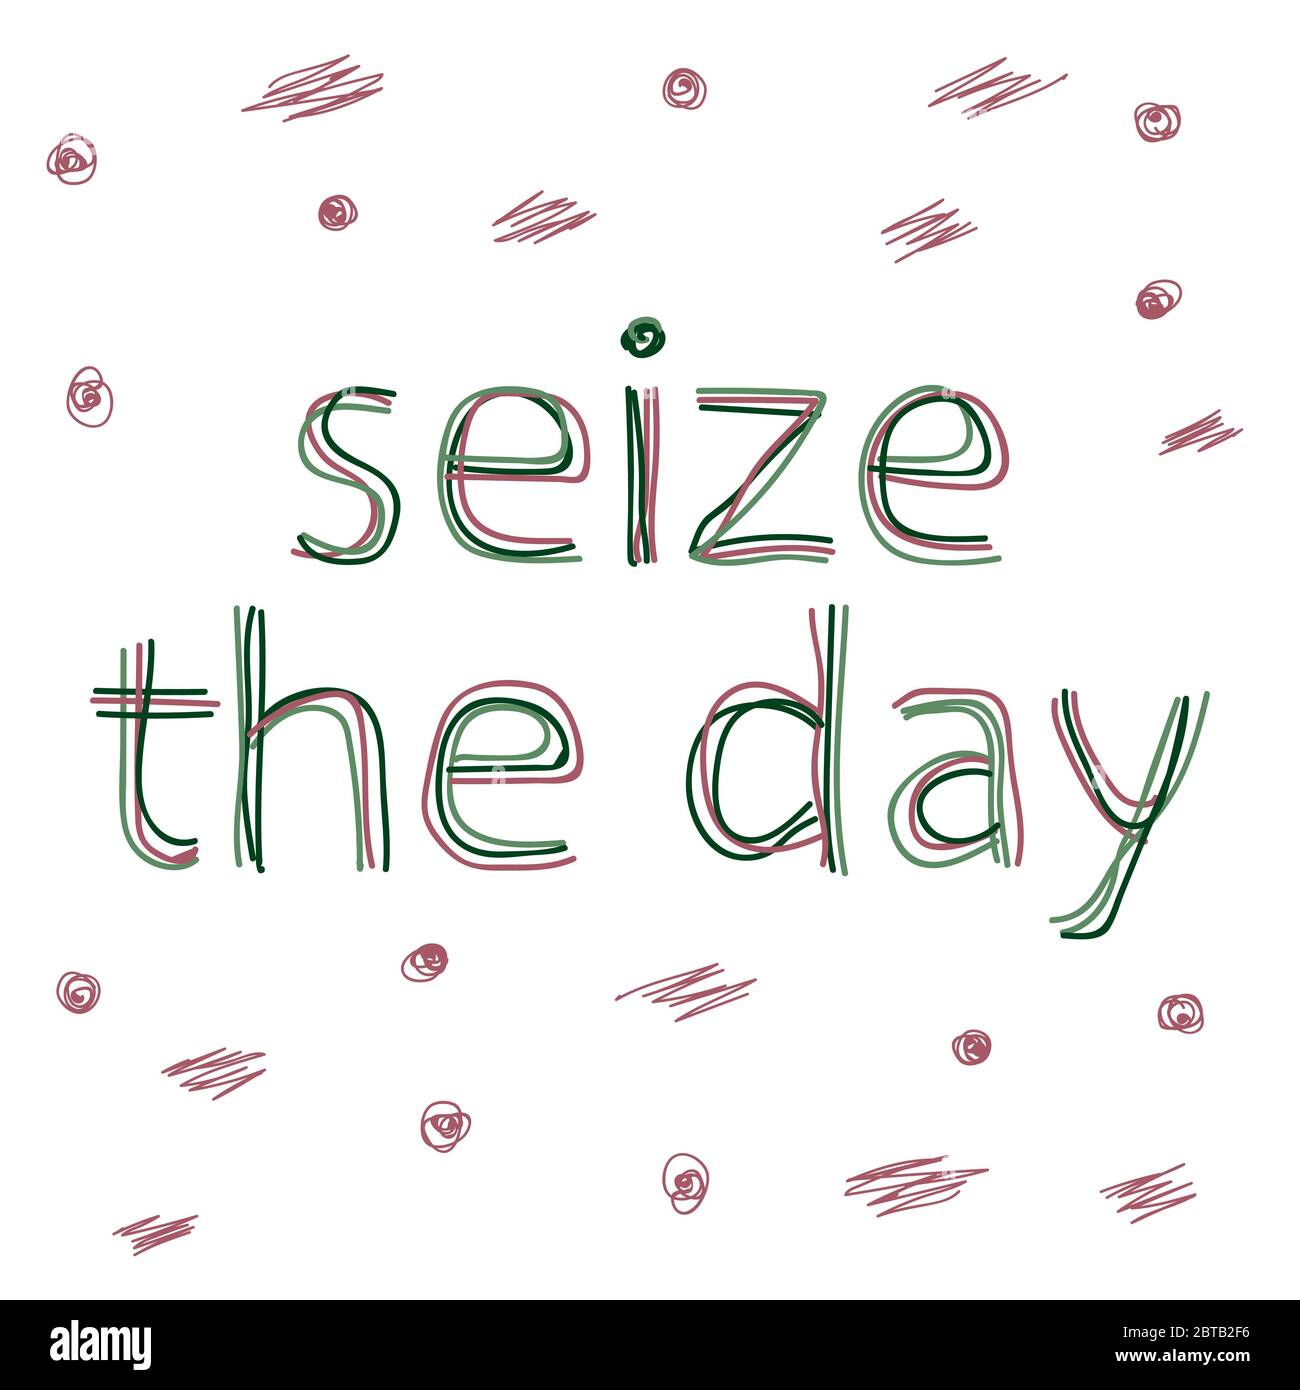 Seize the Day - isolate doodle lettering inscription from multi-colored curved lines like from a felt-tip pen or pensil. Motivating inspiring. Stock Vector